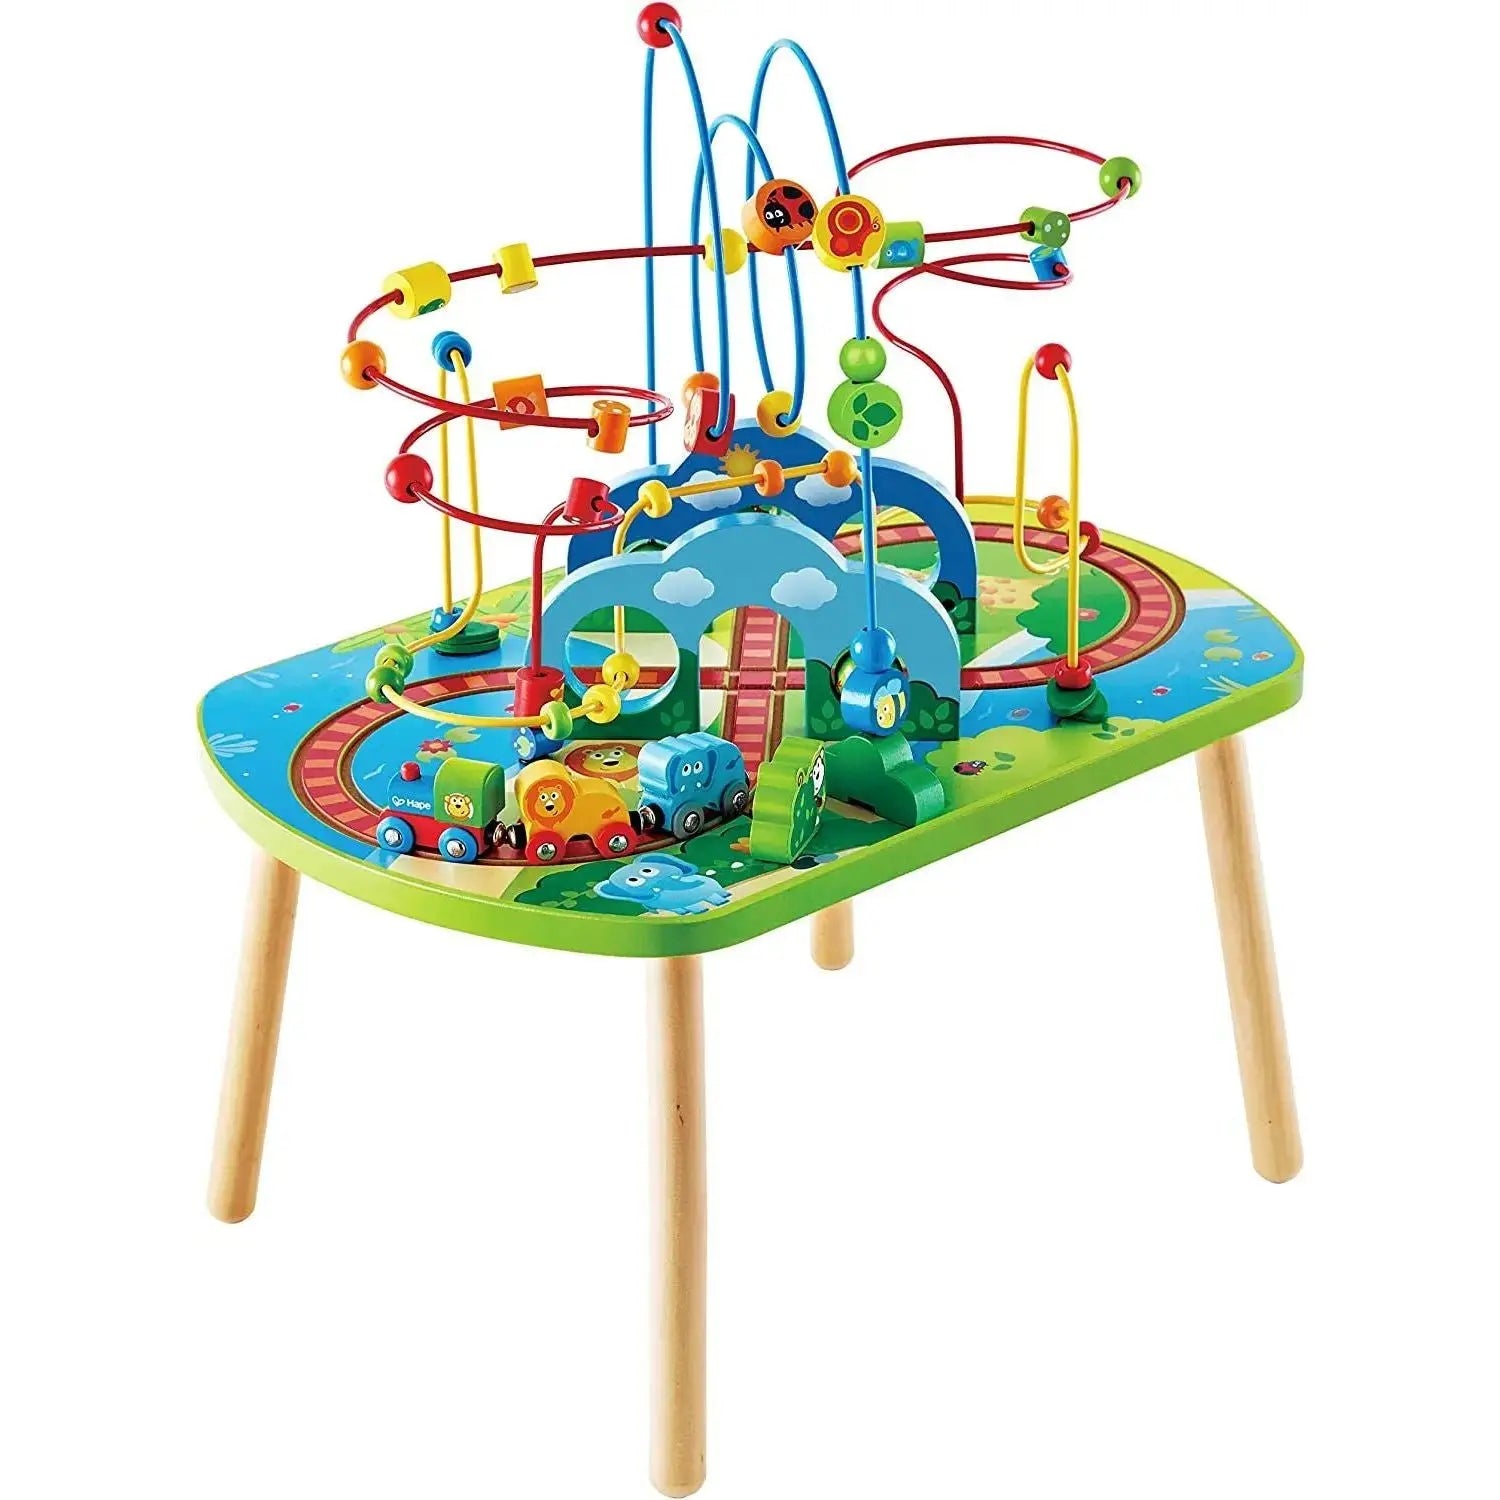 Hape Kids Wooden Play Station & Art Activity Easel Table Set with